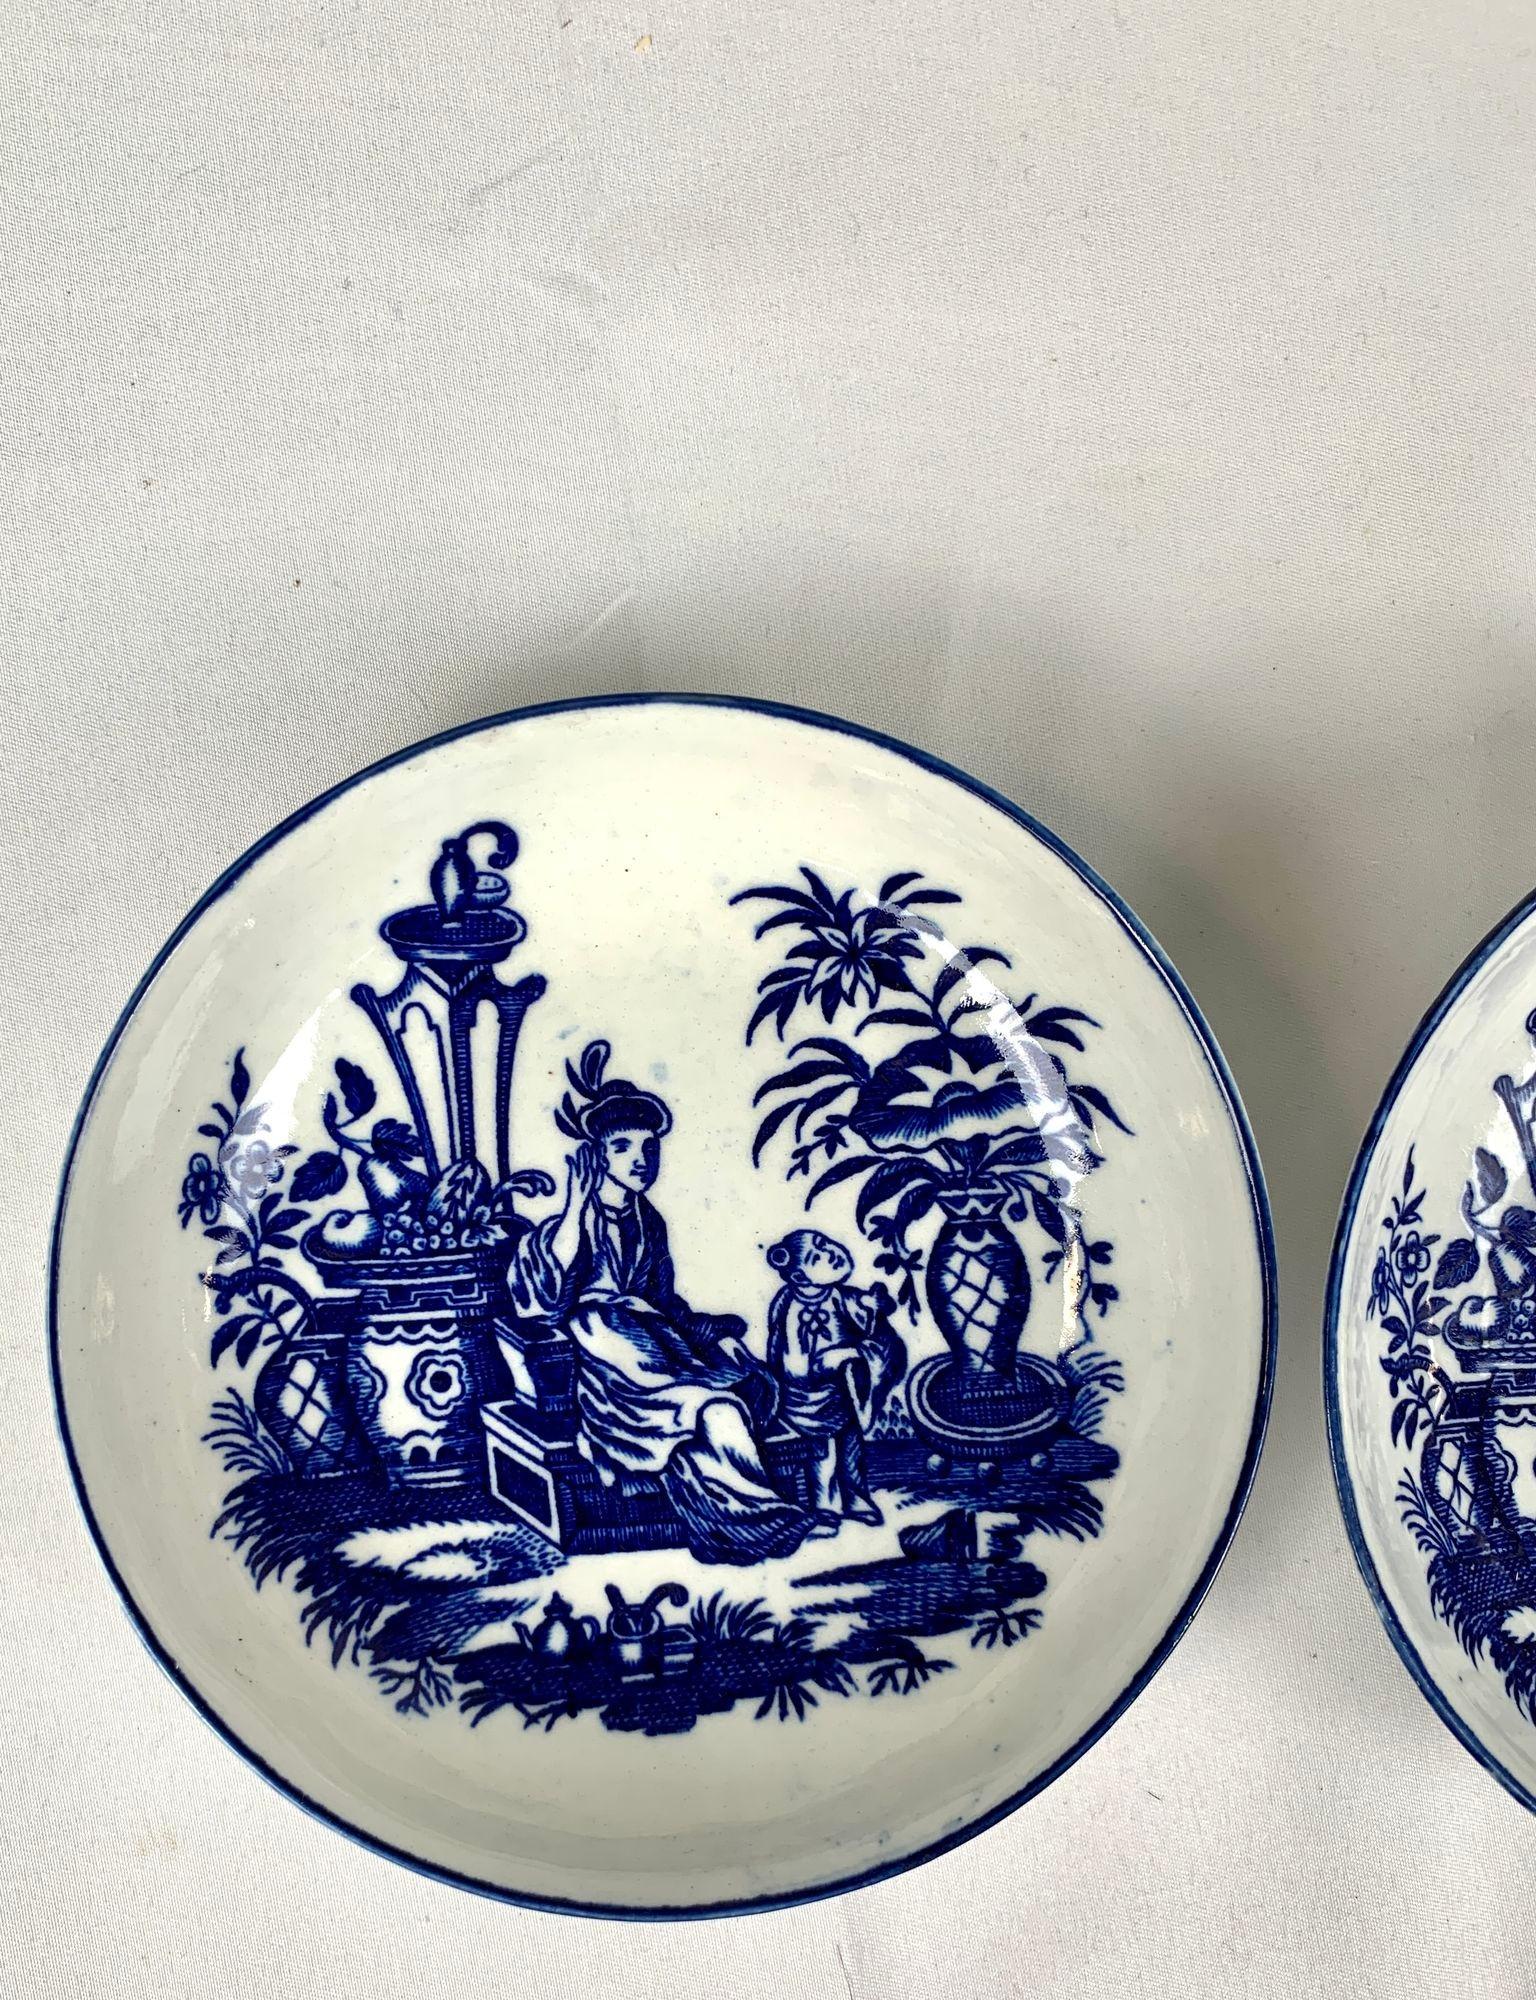 This pair of blue and white porcelain saucers was made by Caughley in England circa 1785.
Painted in underglaze blue, they show a lovely chinoiserie scene of a mother and son in a lush garden with flowering trees and several large vases.
The blue